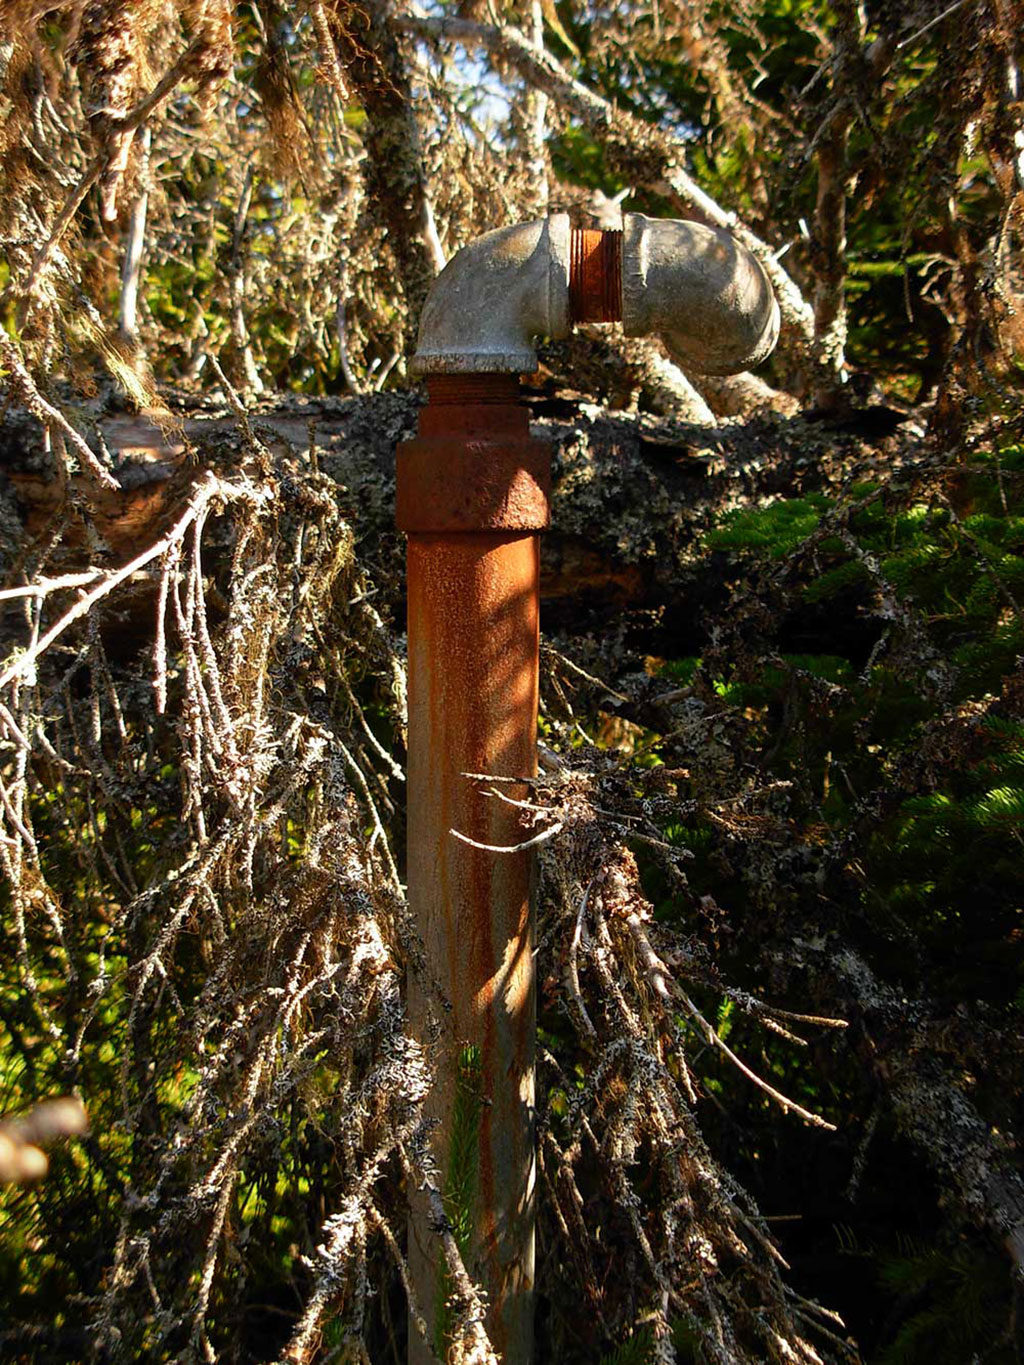 A rusted pipe comes out of the ground and is covered in fallen branches.